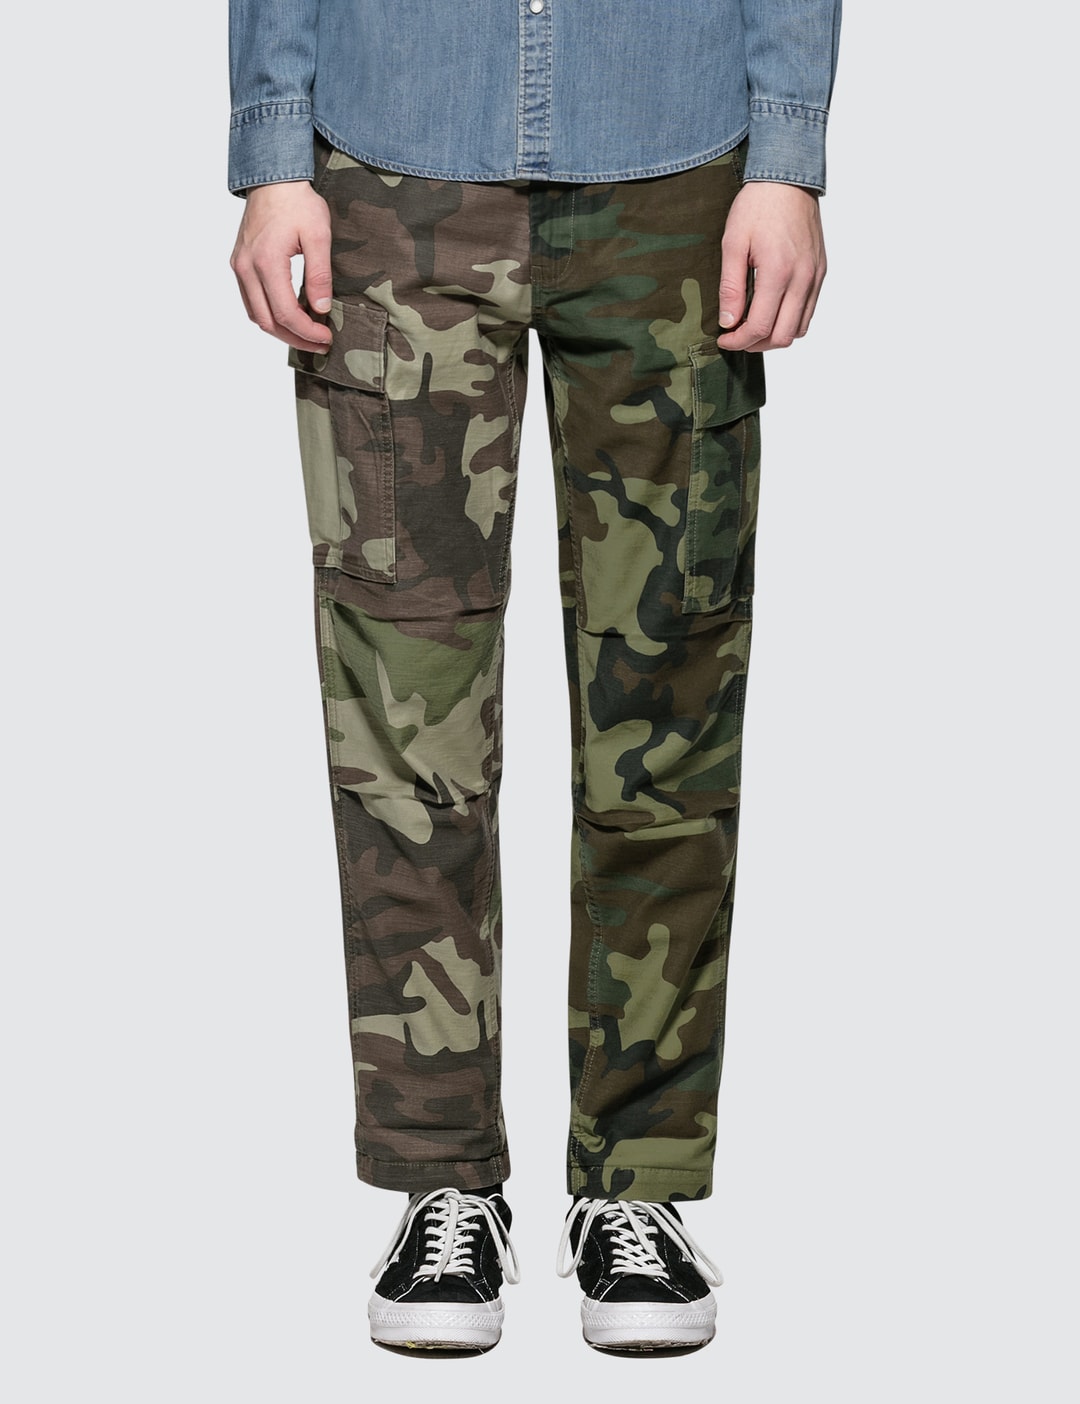 Levi's - Hi-ball Cargo Pants | HBX - Globally Curated Fashion and Lifestyle  by Hypebeast